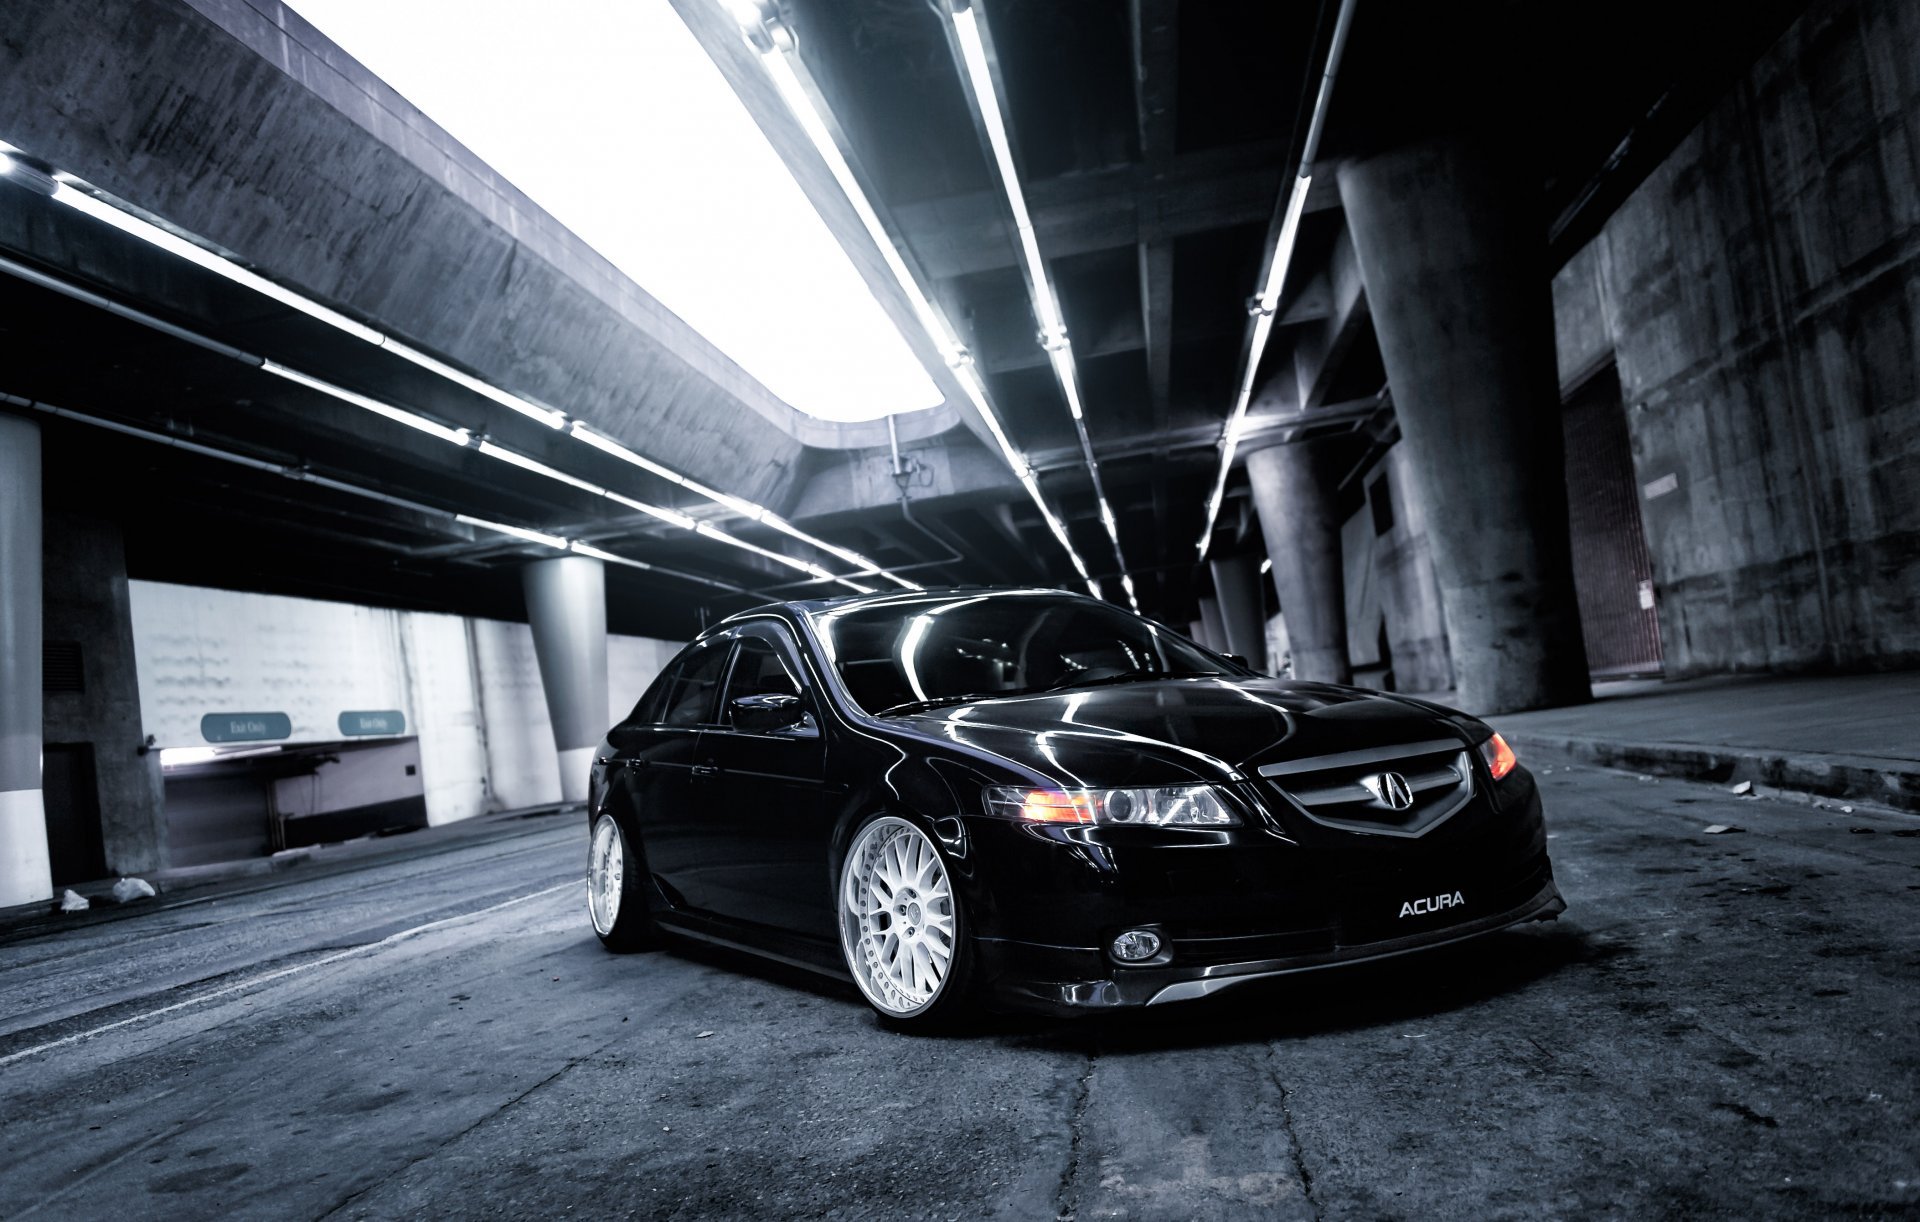 Download Latest Hd Wallpapers Of Vehicles Acura Tl